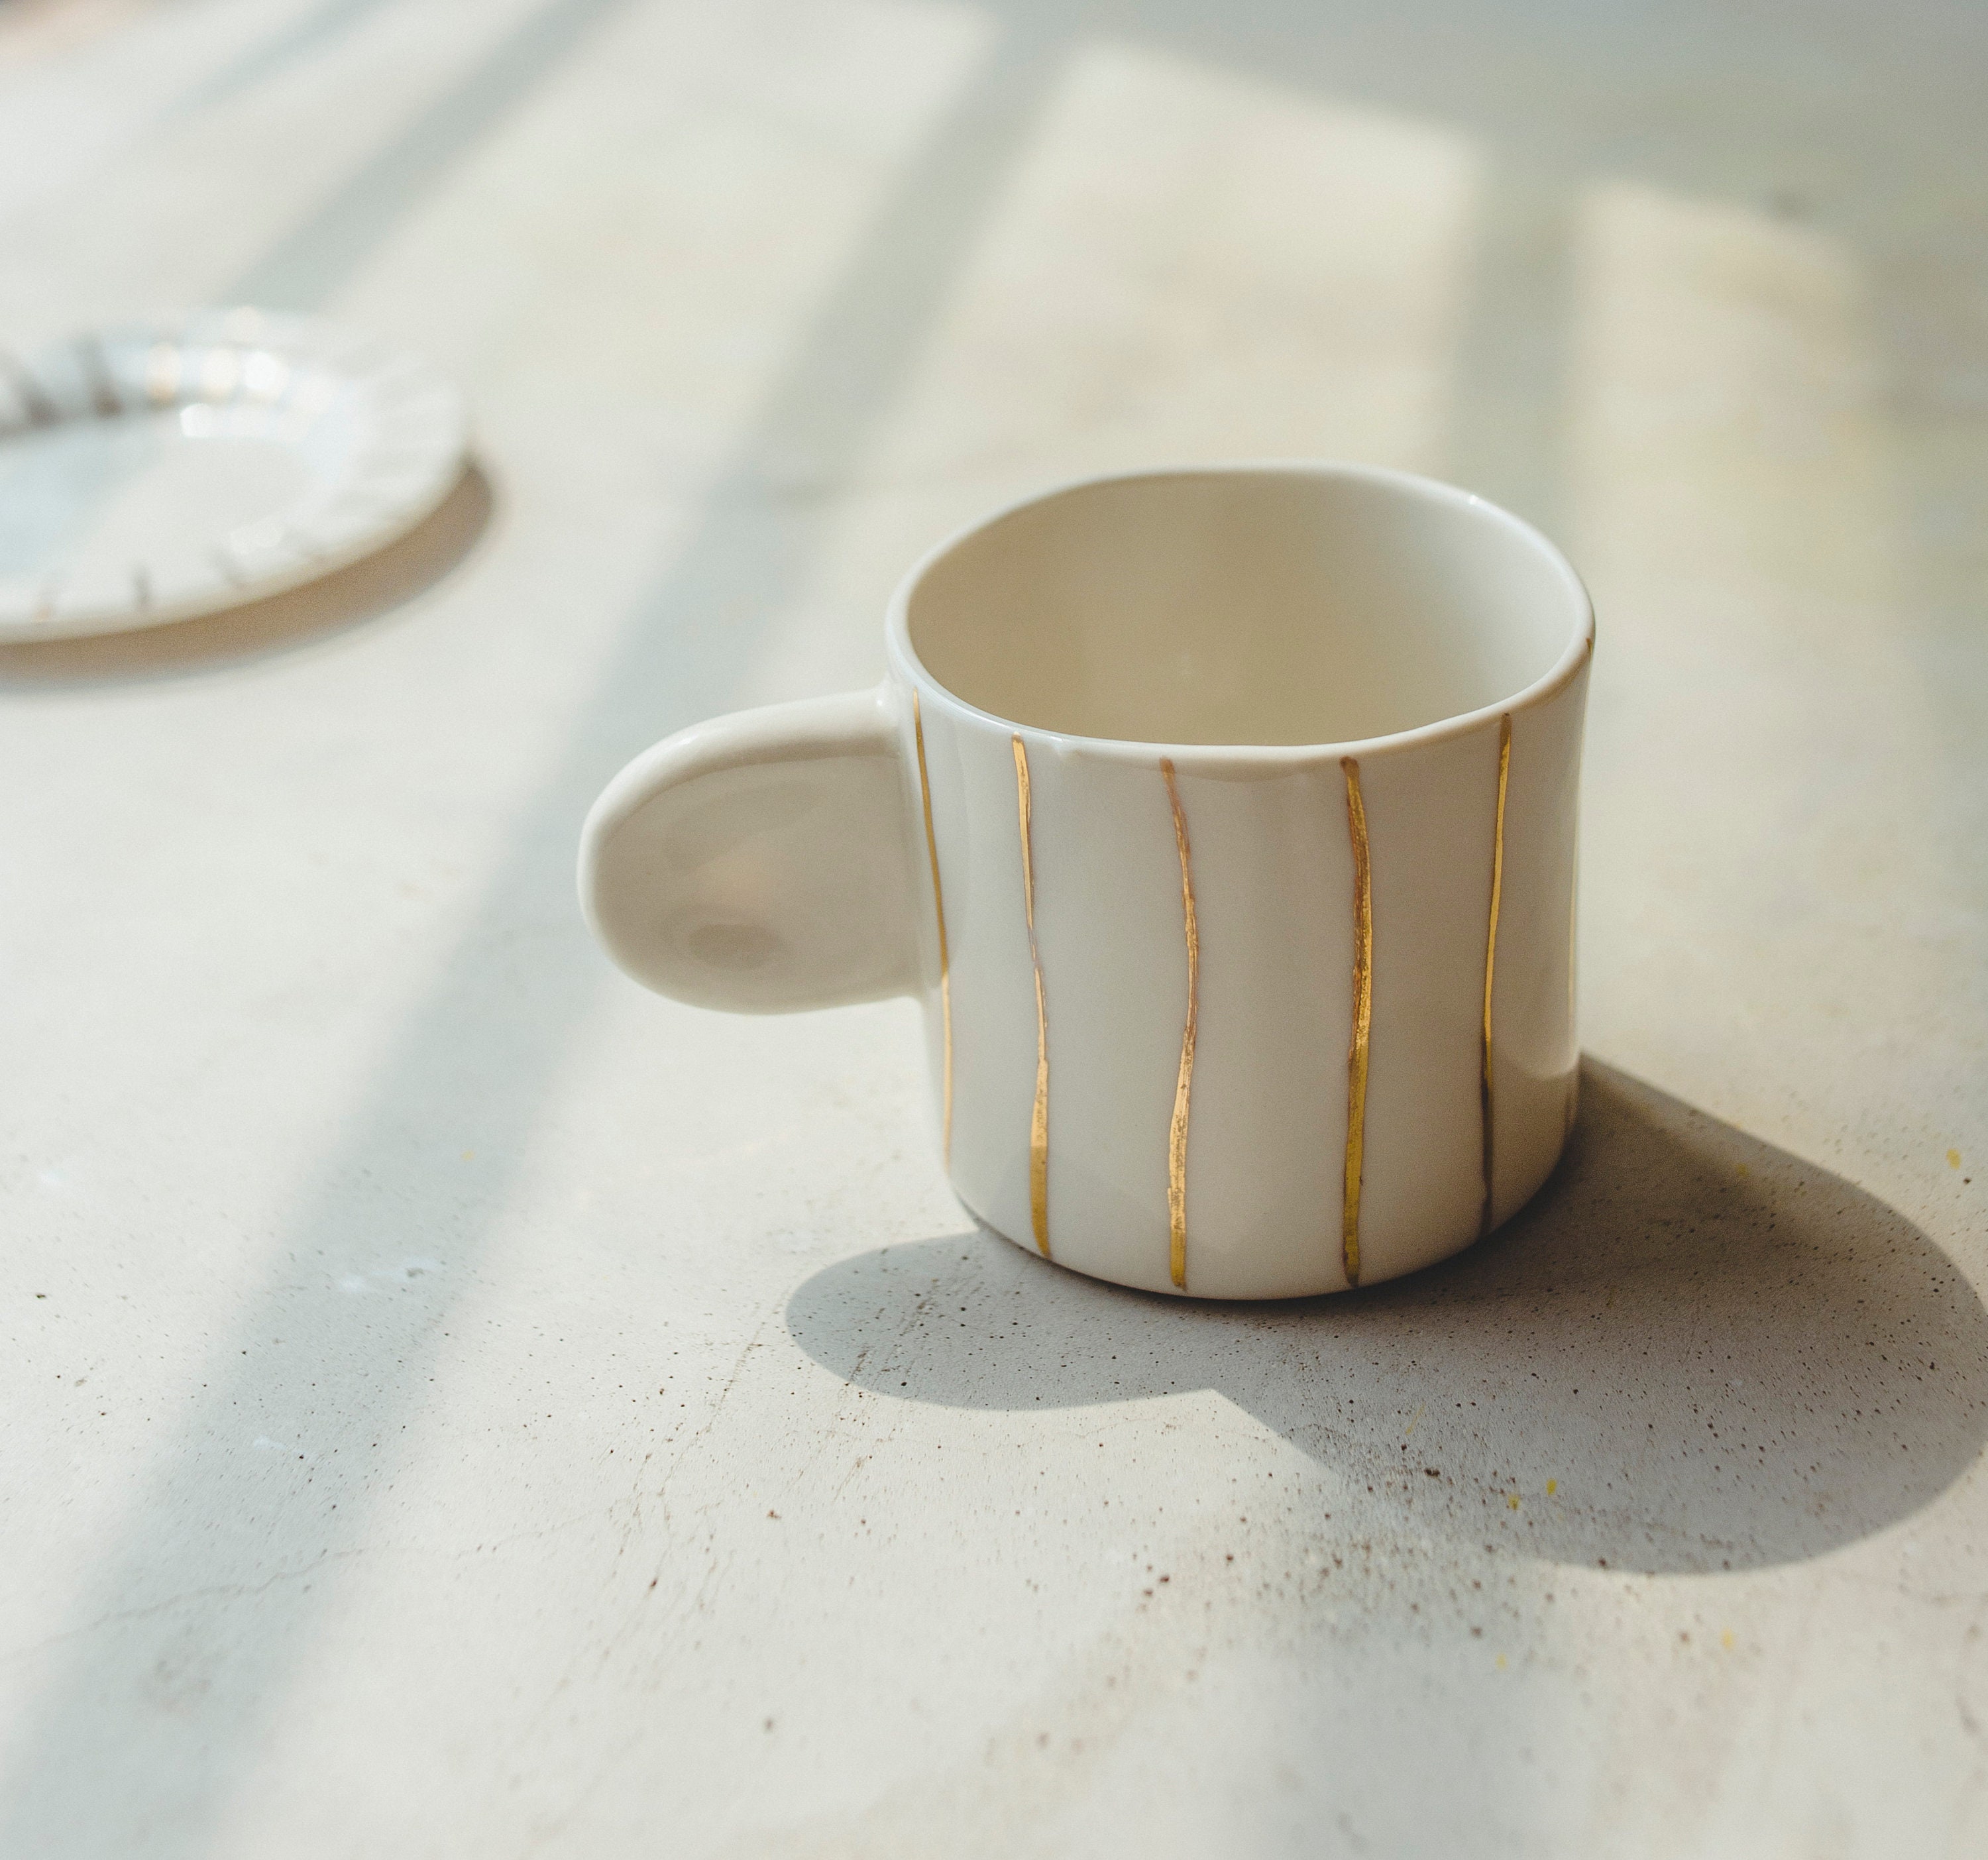 Mugs Mini Hand Painted Espresso Cups With Gold Handle Ceramic